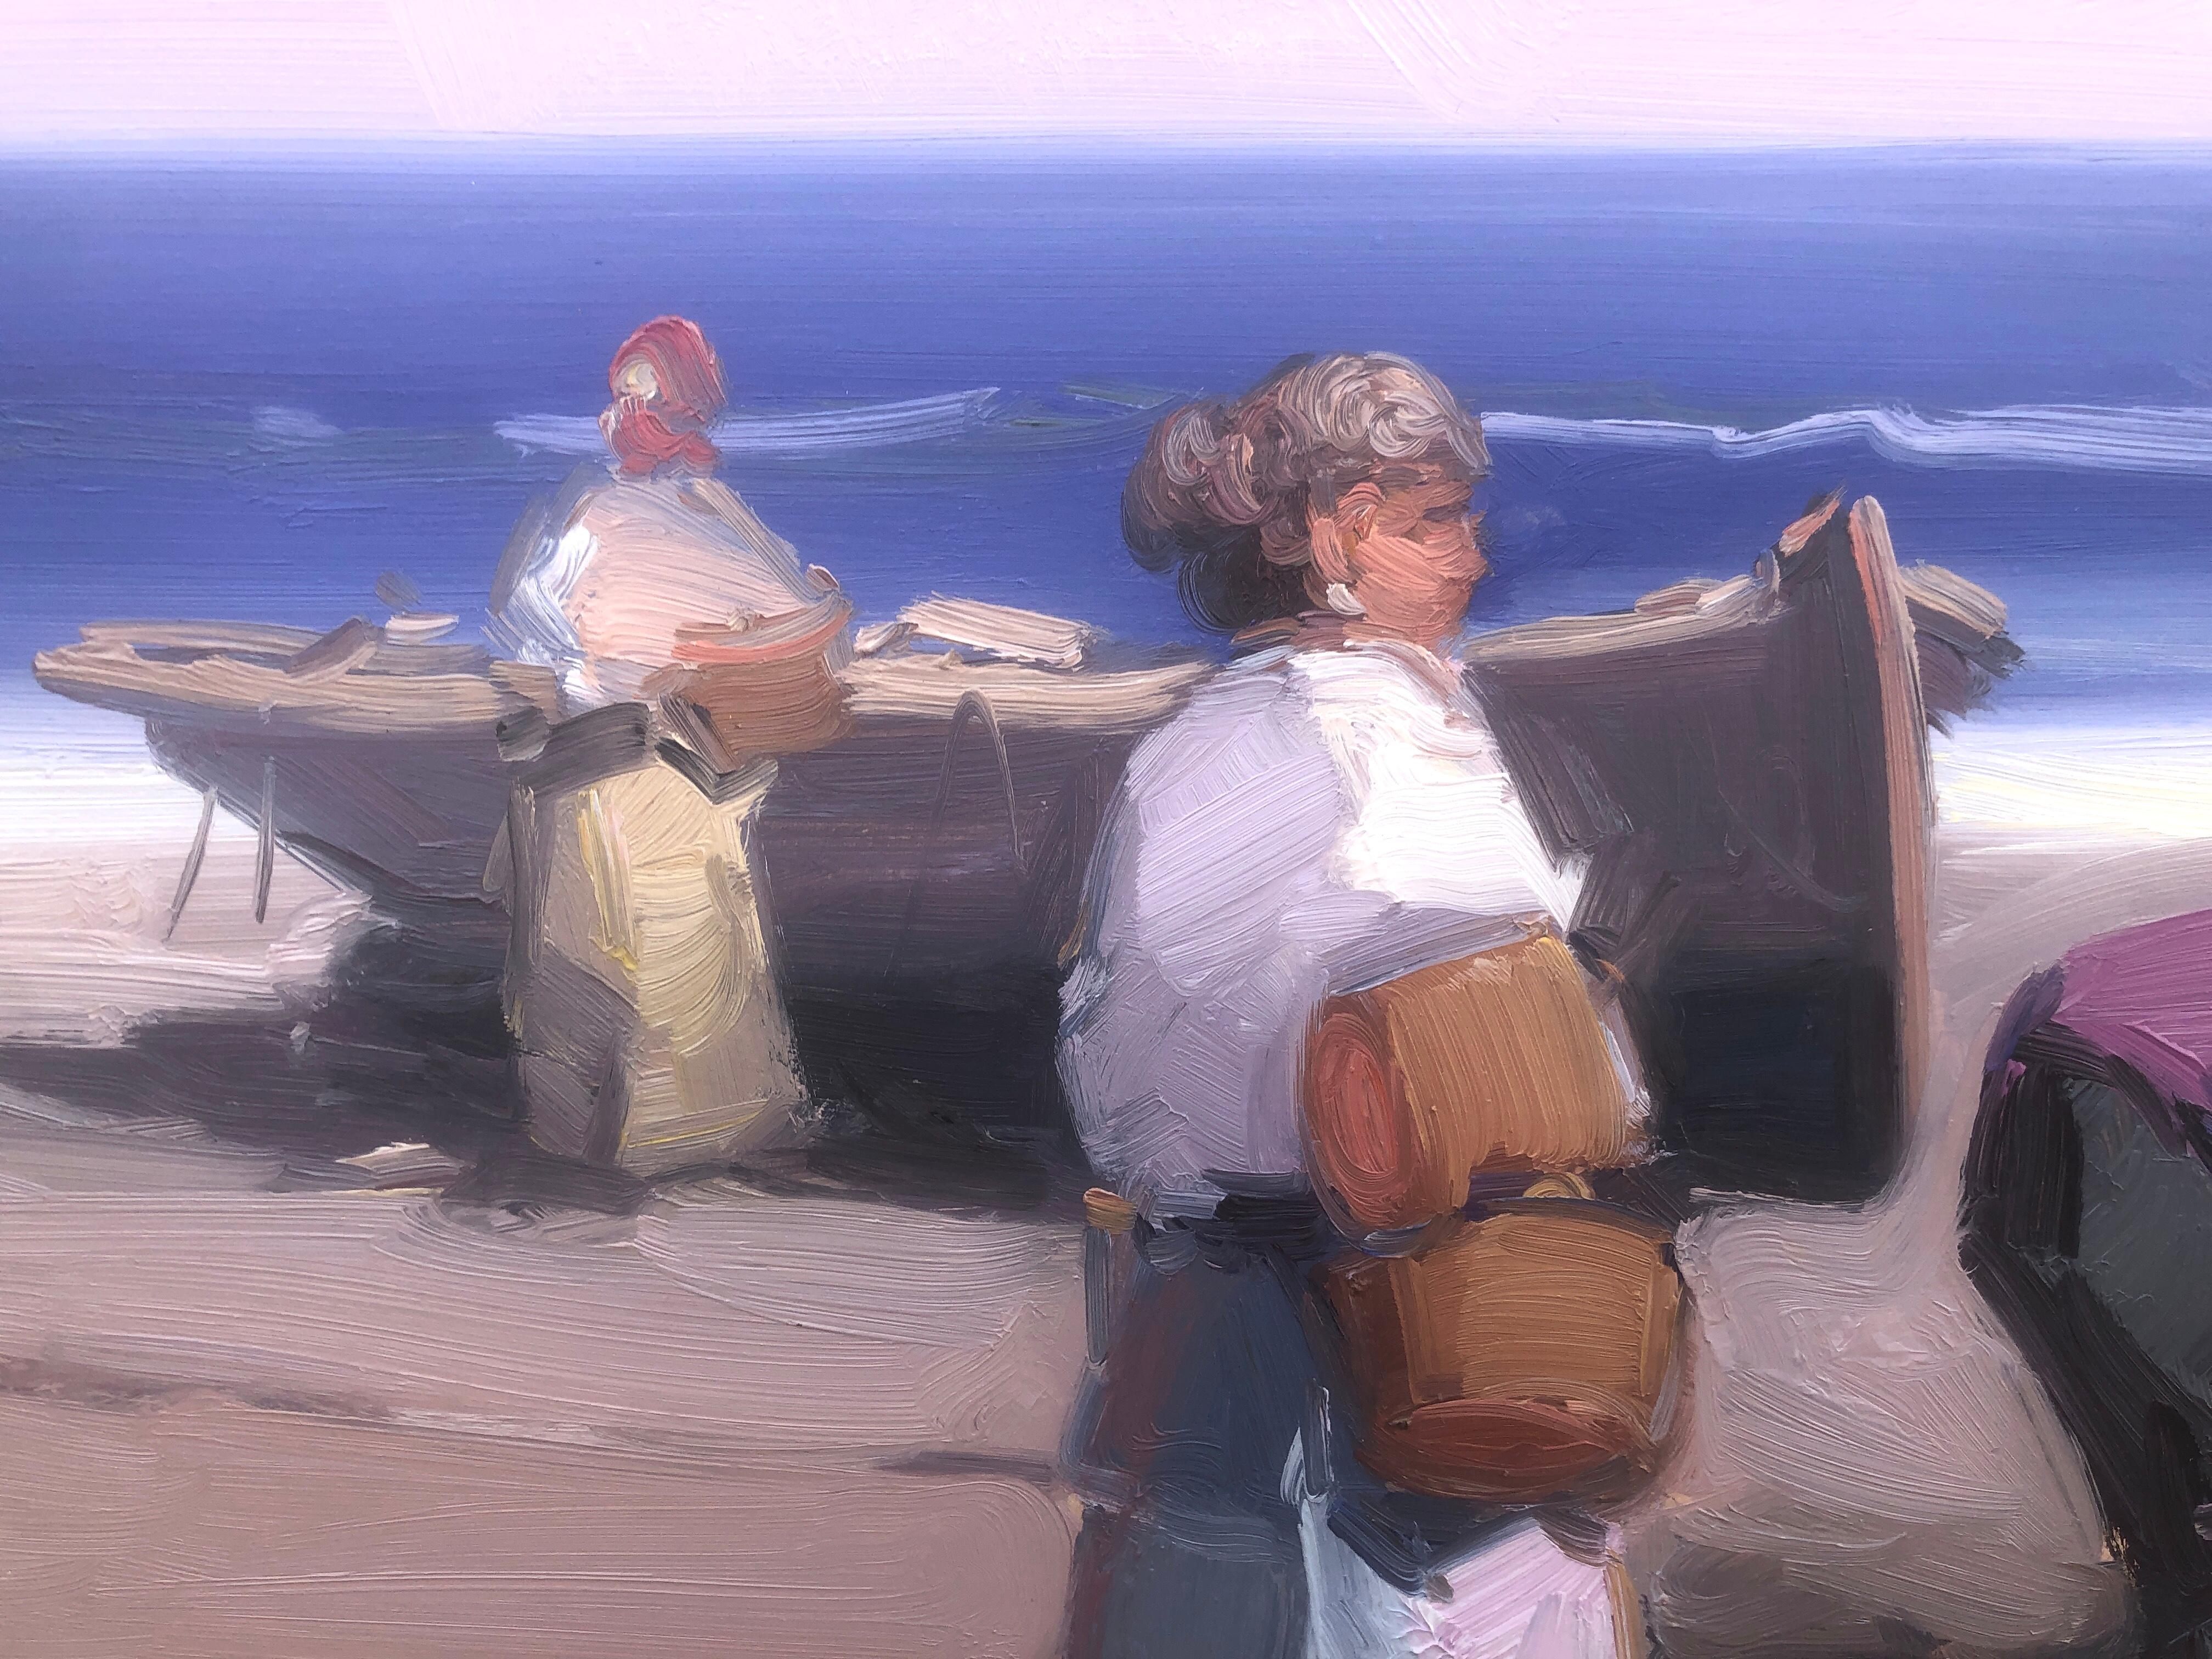 Spanish fishermen on the beach Spain oil on canvas painting - Post-Impressionist Painting by Gabriel Casarrubios